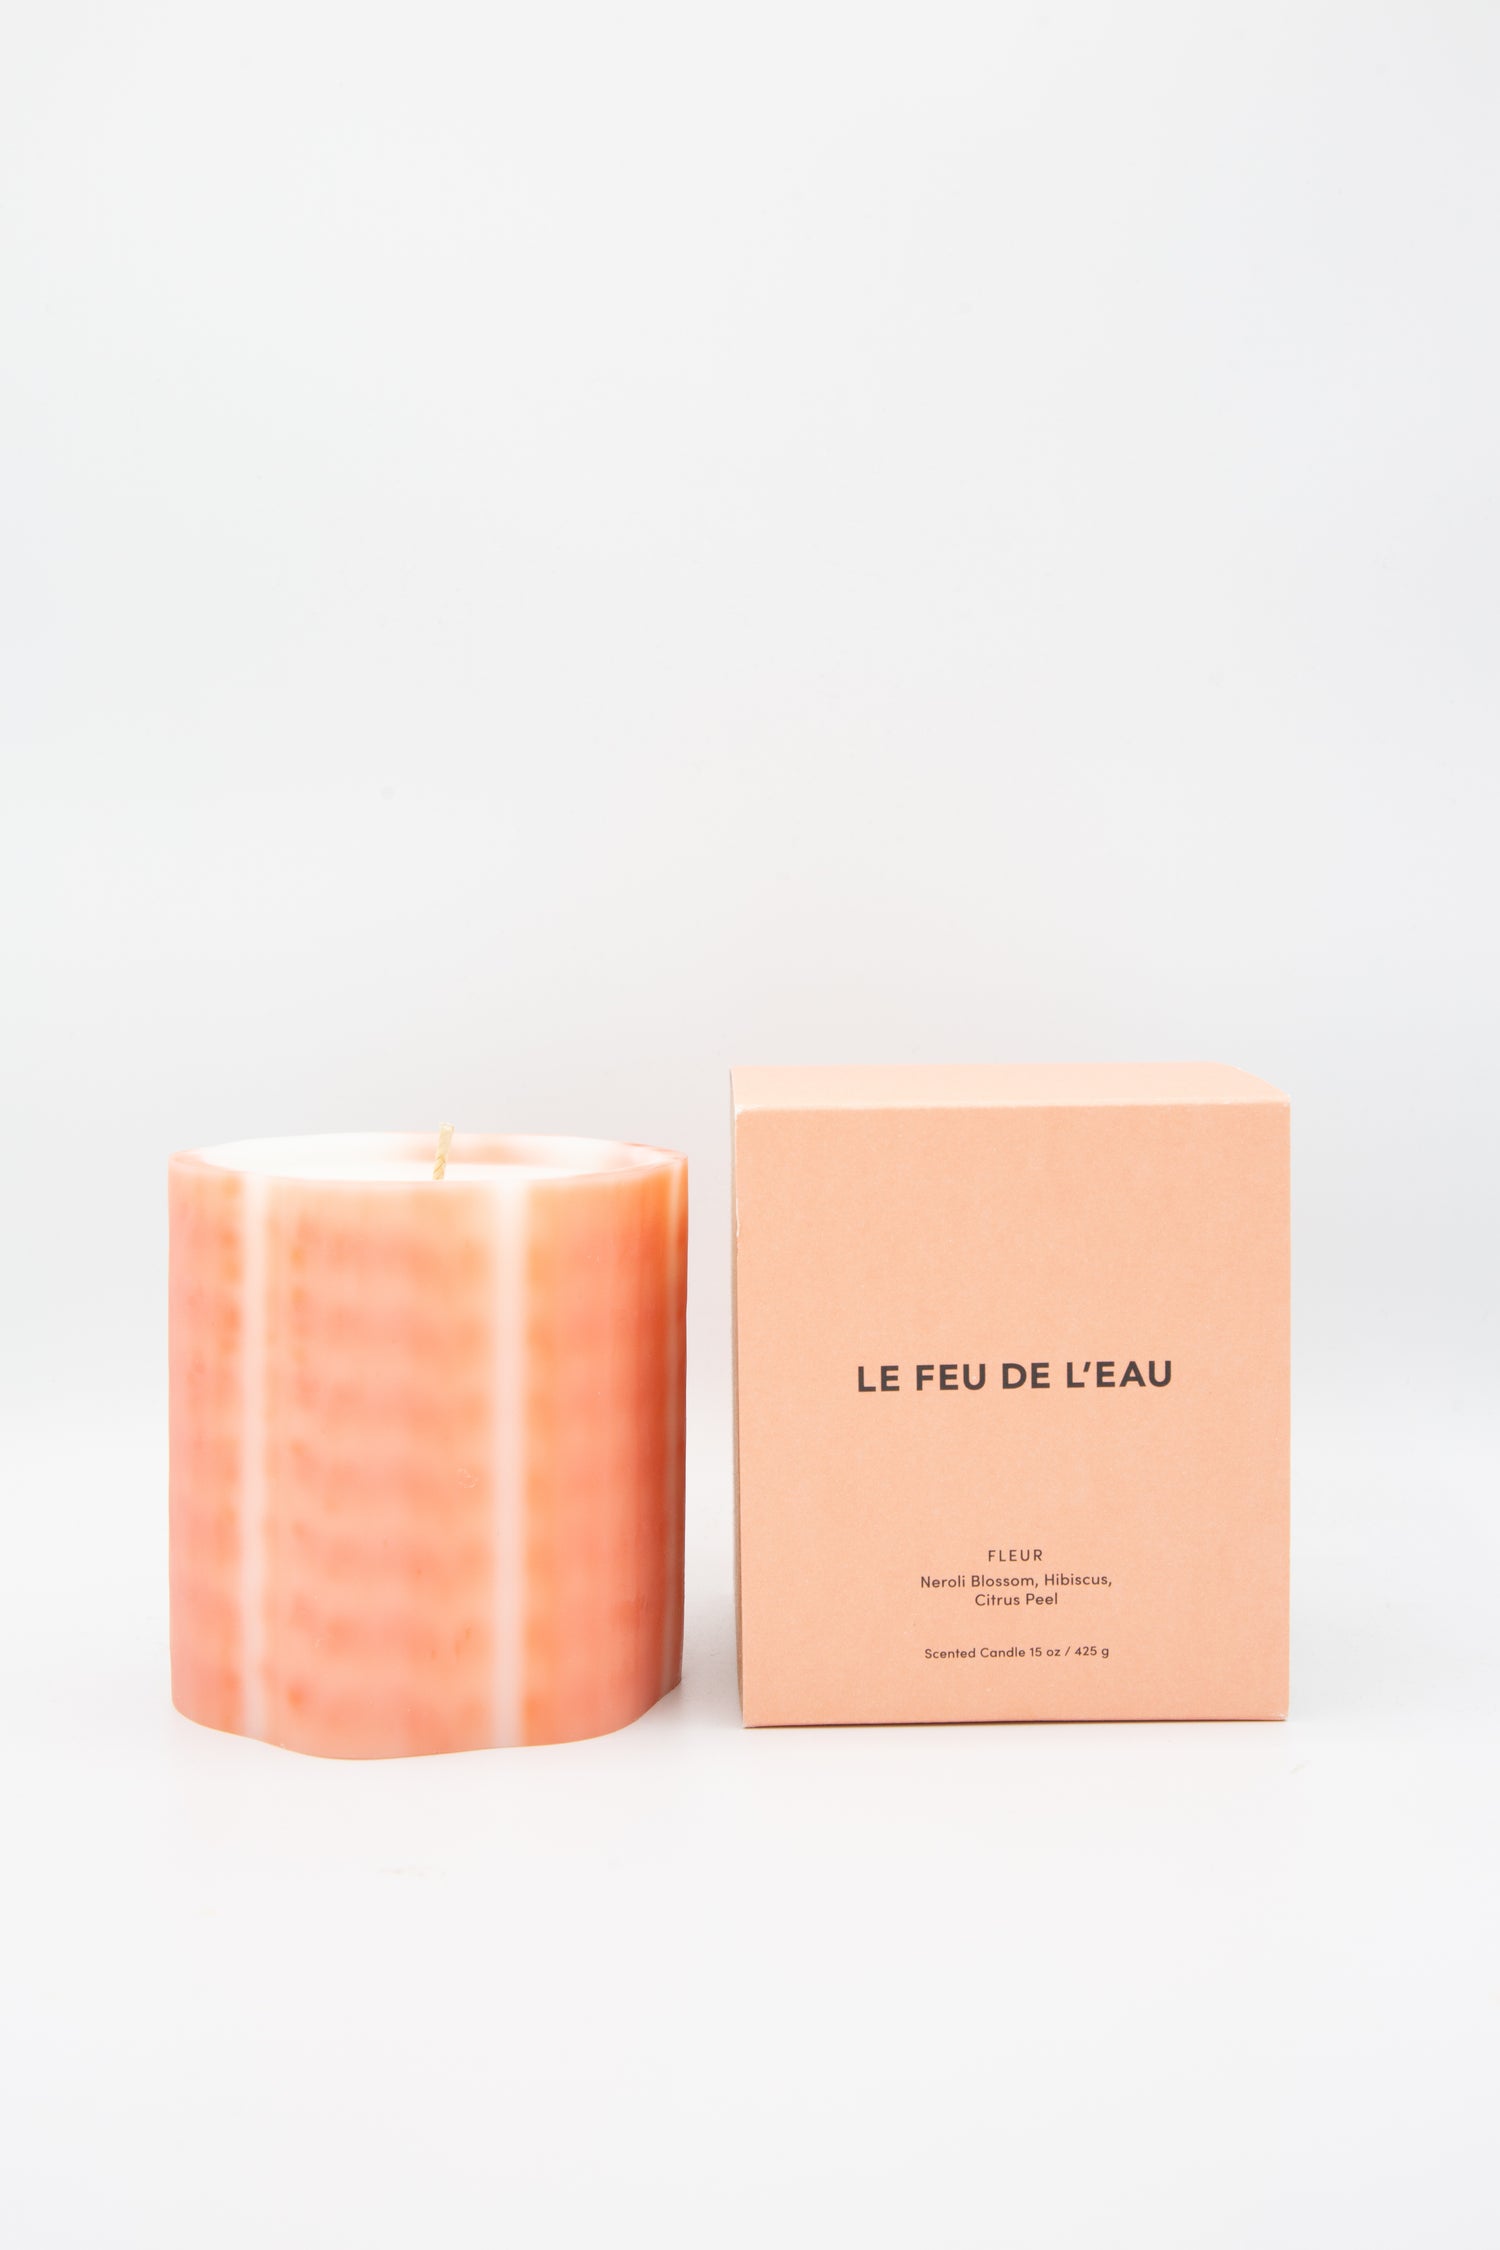 An Artisanal Candle in Neroli by Le Feu De L'Eau, in a pink box with a pink label.